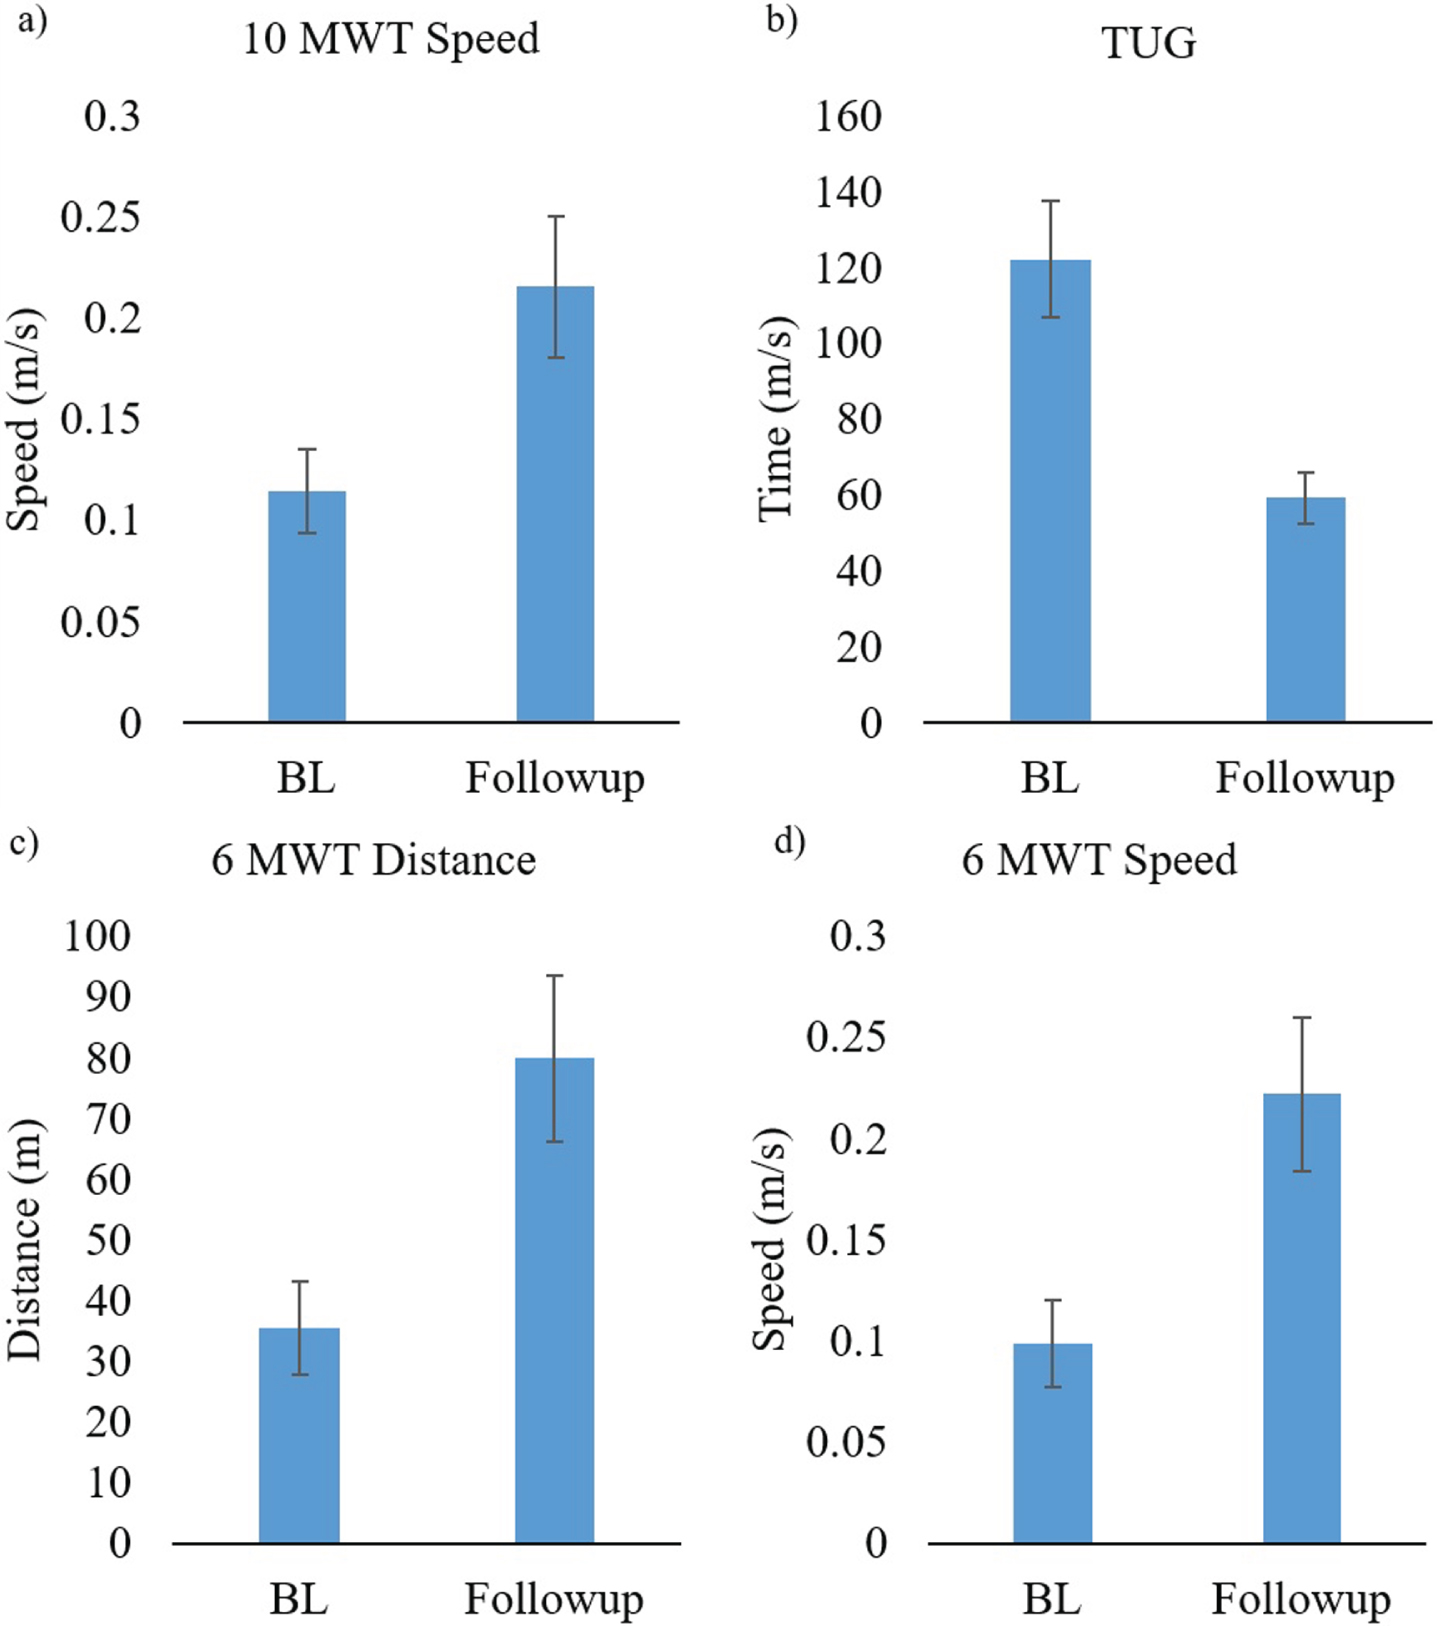 Functional ambulation data is presented as mean±standard error at baseline and follow-up sessions a) speed during 10MWT; b) Time to complete the TUG; c) Distance during the 6 MWT; and d) Speed during 6 MWT.